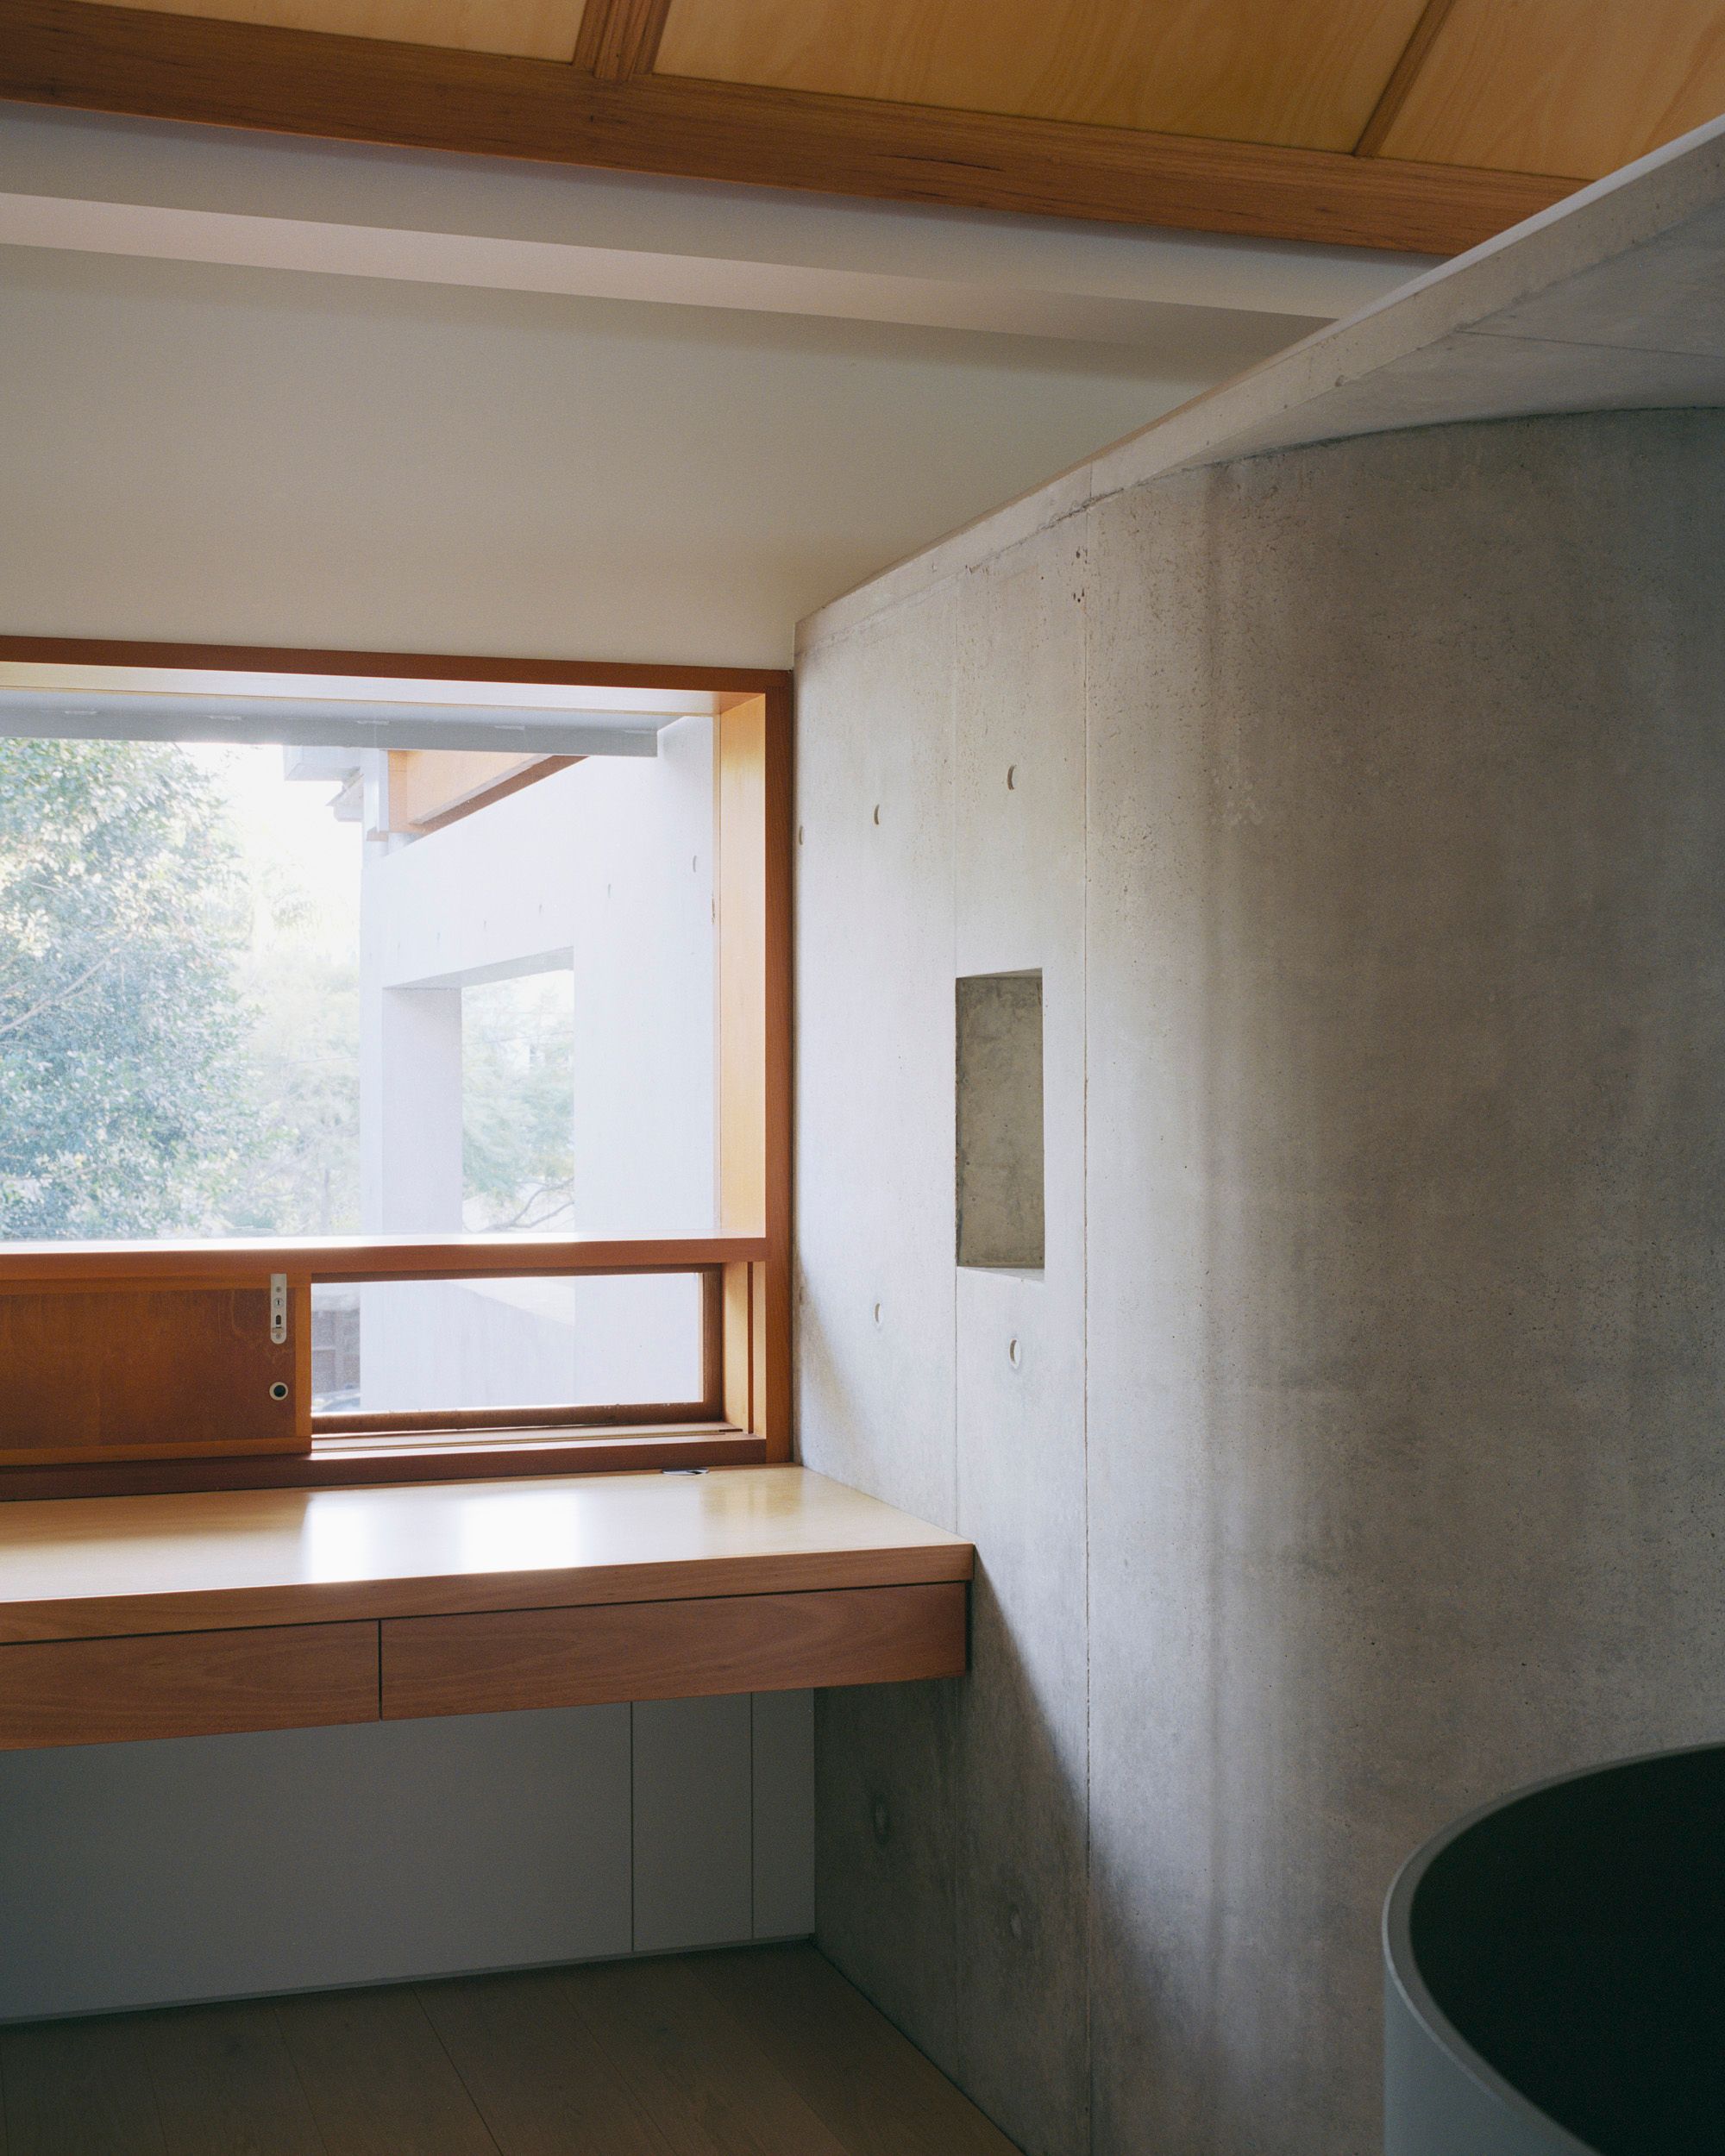 Lee House by Candalepas Associates. Desk view looking out form window to courtyard. 